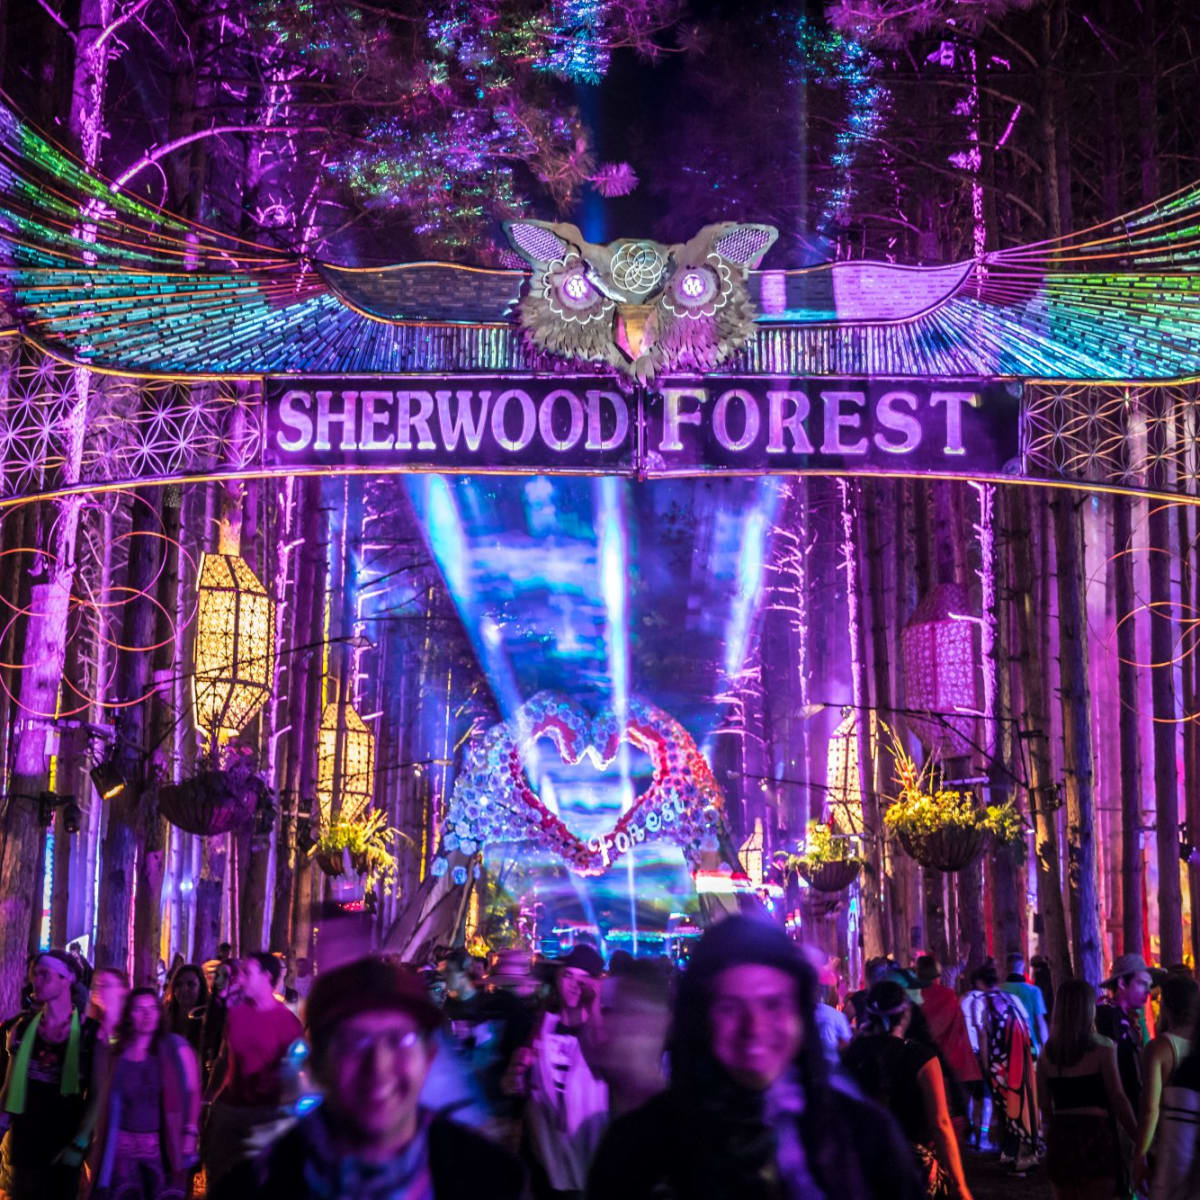 Electric Forest Organizers Approve 2021 Summer Festival Dates  -  The Latest Electronic Dance Music News, Reviews & Artists